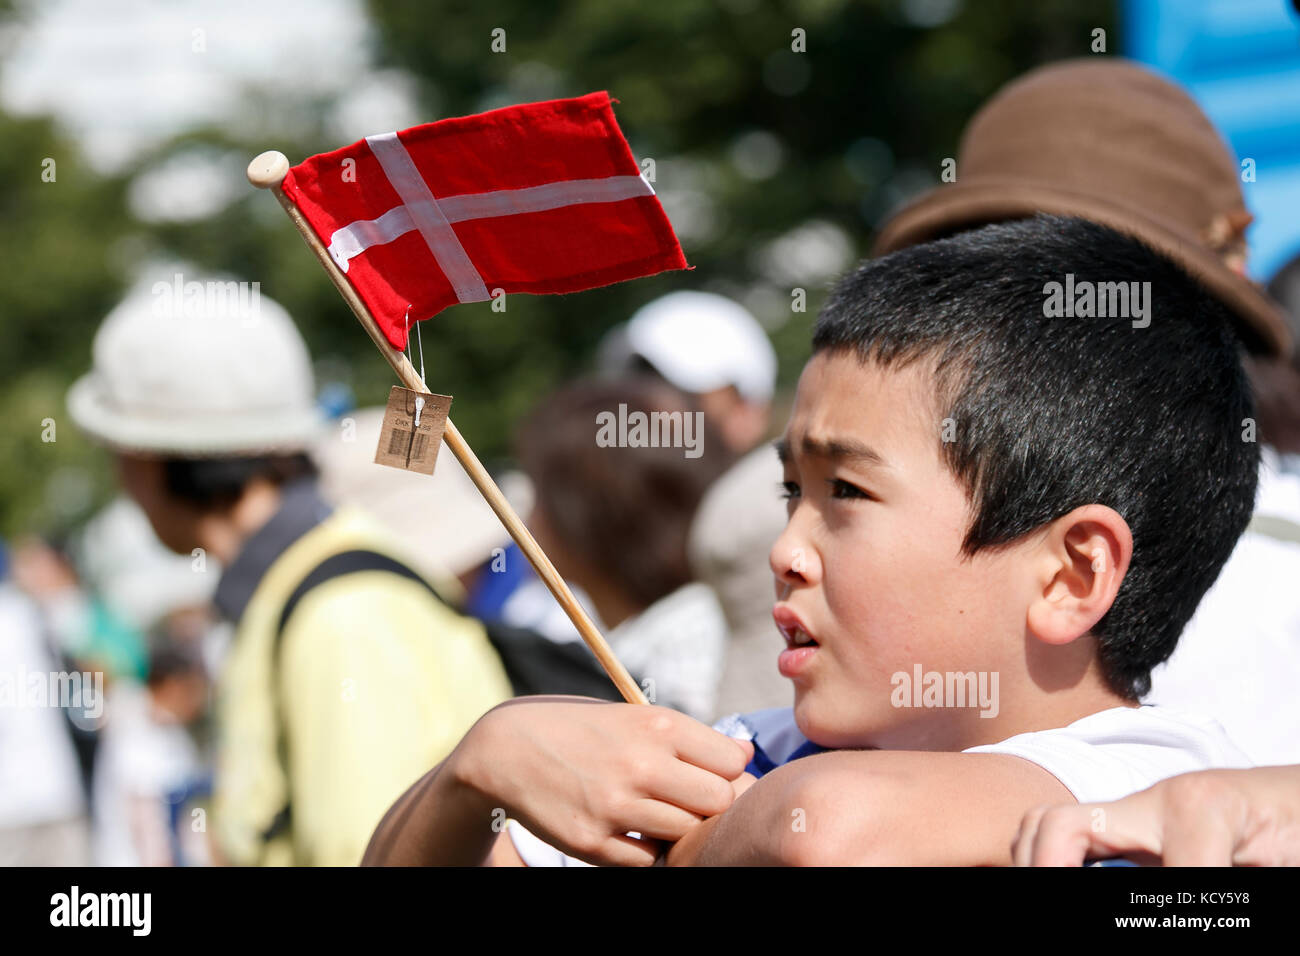 Tokyo, Japan. 8th October, 2017. A boy holding a Denmark flag waits to greet His Royal Highness the Crown Prince Frederik Andre Henrik Christian and Her Royal Highness the Crown Princess Mary Elizabeth Donaldson during the Danish Festival and Walkathon at Toyosu Park on October 8, 2017, Tokyo, Japan. The Danish Crown Prince Couple attended the festival which celebrating 150 years of Diplomatic relations between Japan and Denmark. Stock Photo